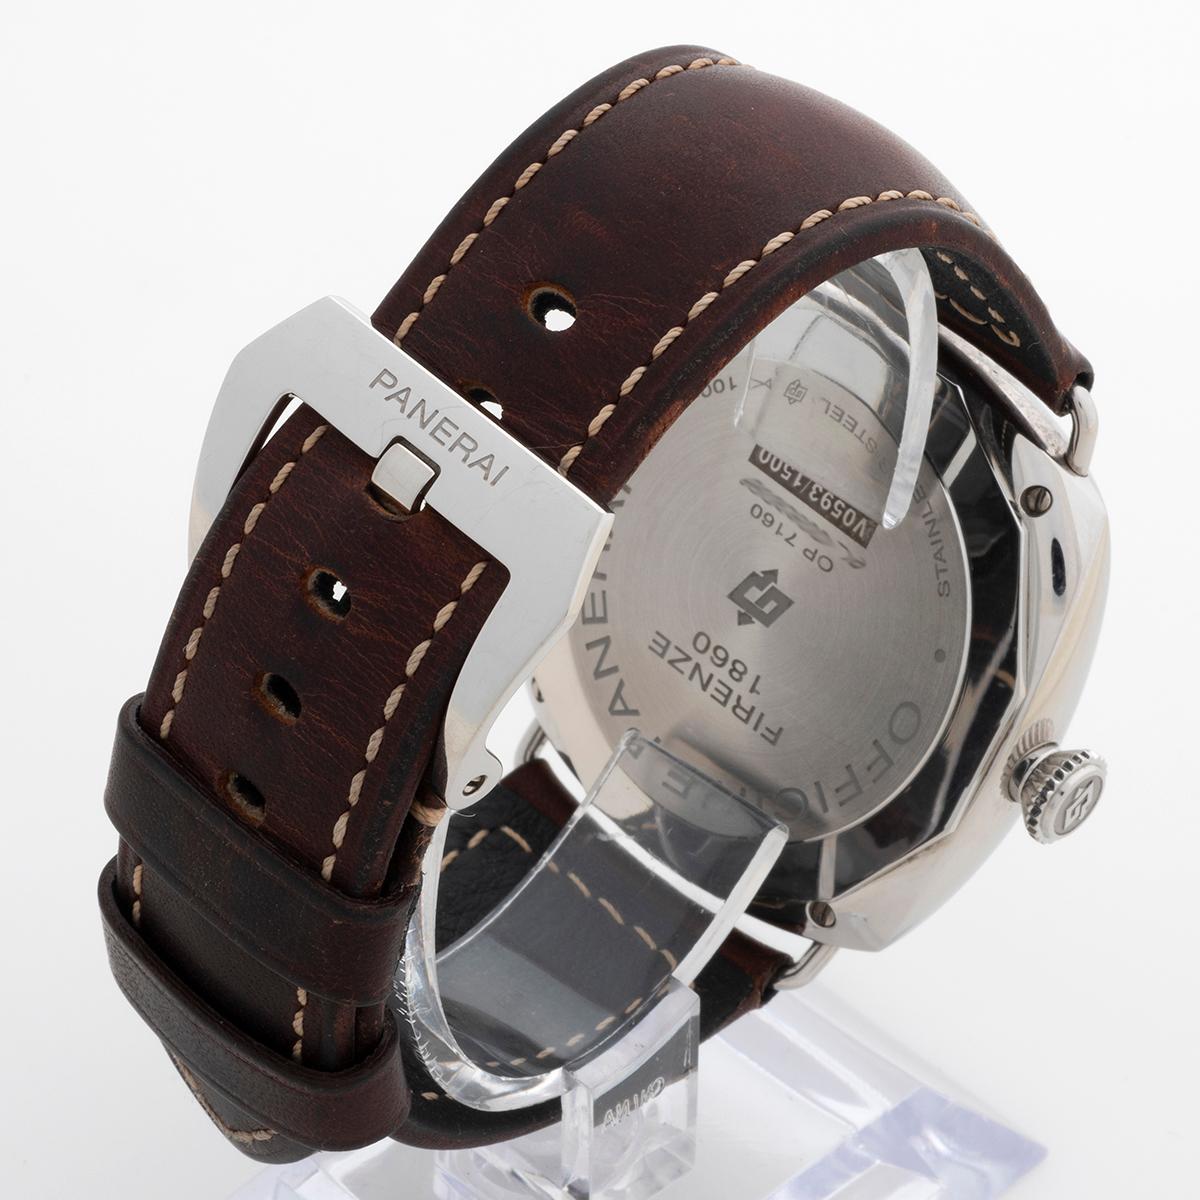 Panerai Radiomir Ref PAM00753, Box & Papers, Outstanding Condition 1